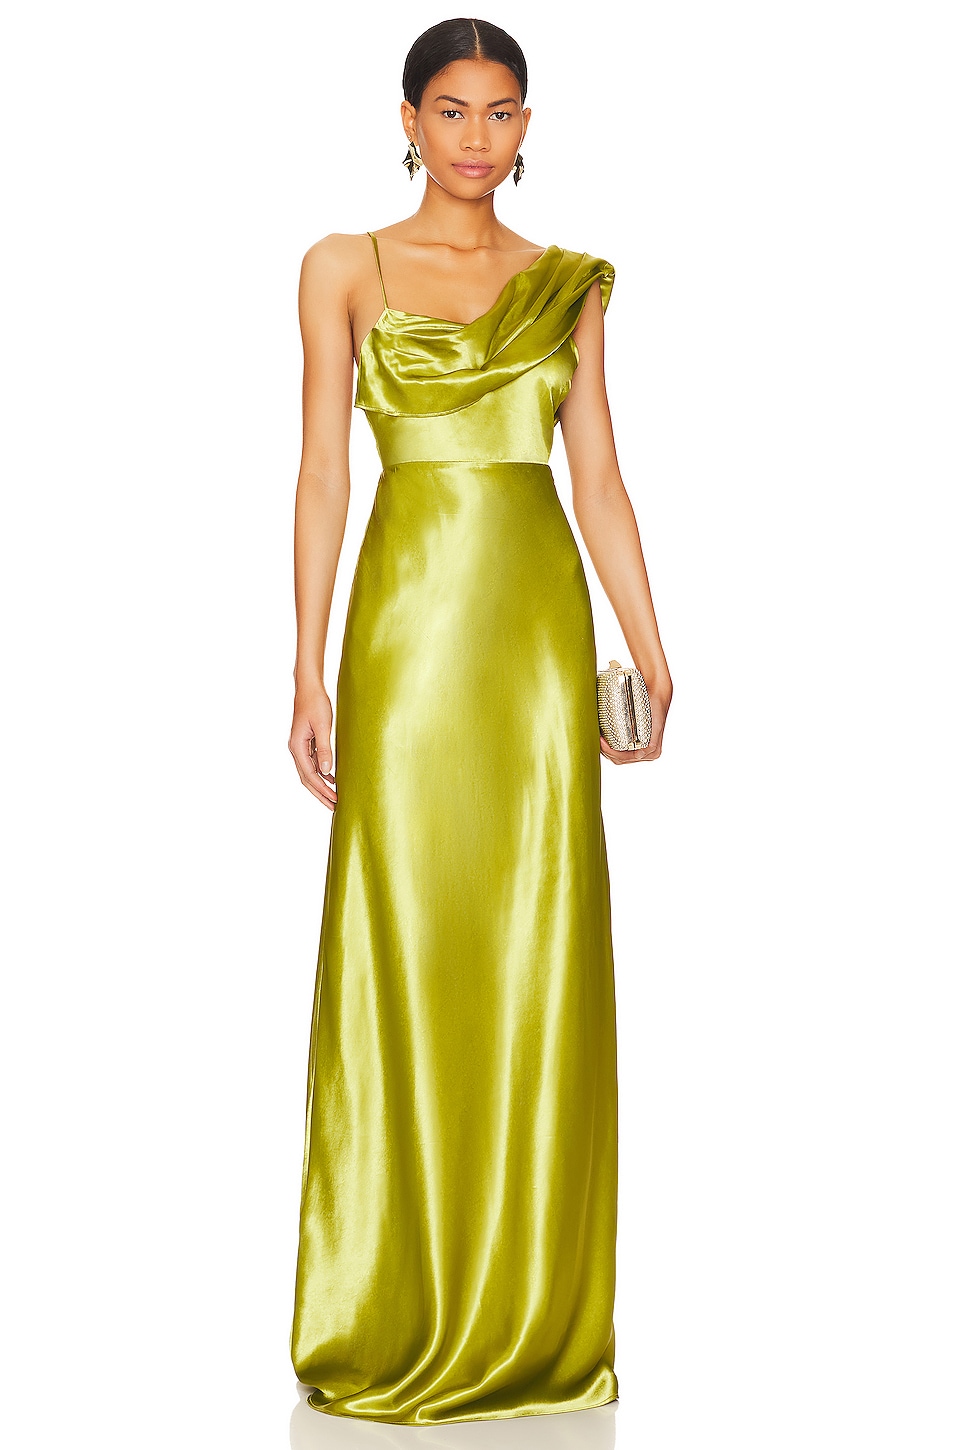 House of Harlow 1960 x REVOLVE Antonia Gown in Green